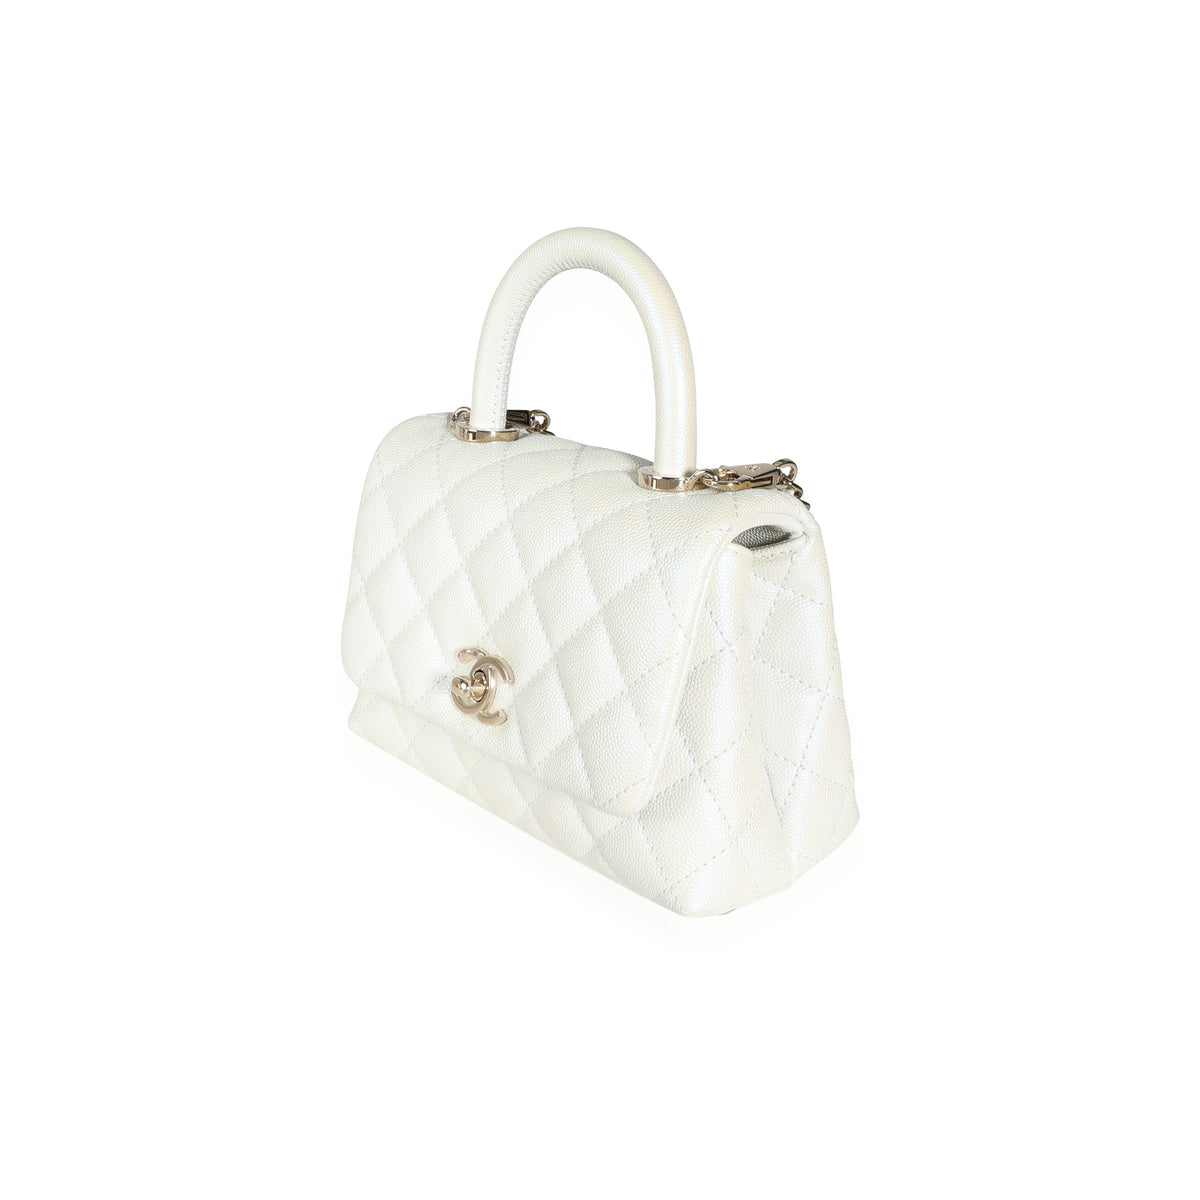 Chanel - Authenticated Trendy CC Top Handle Handbag - Leather White Plain for Women, Very Good Condition